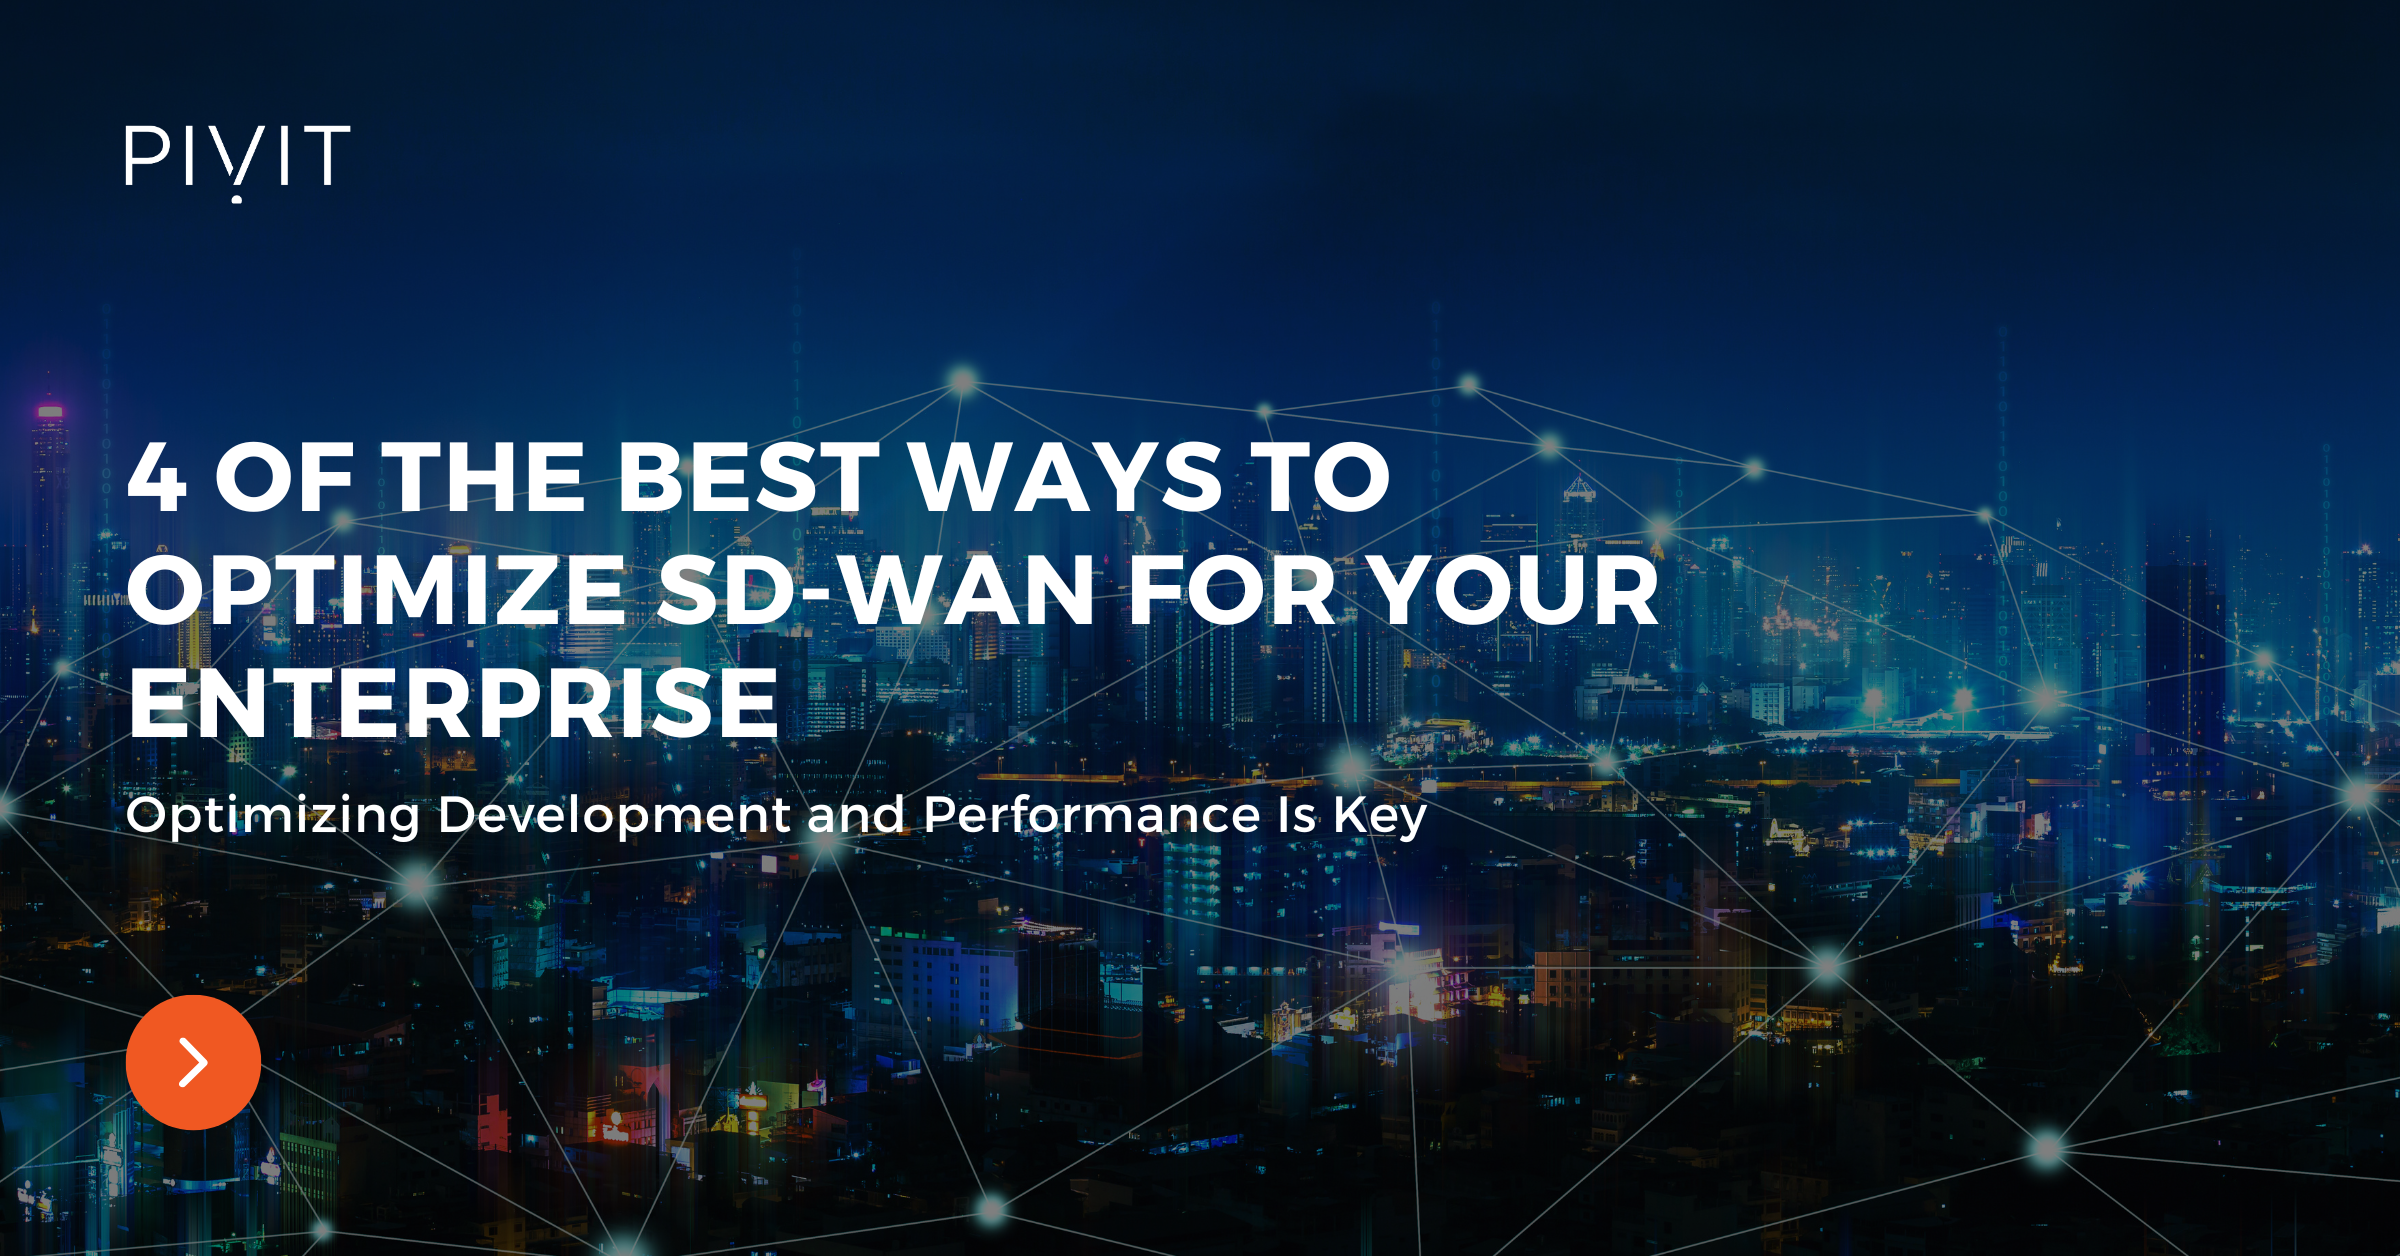 4 of the Best Ways to Optimize SD-WAN for Your Enterprise